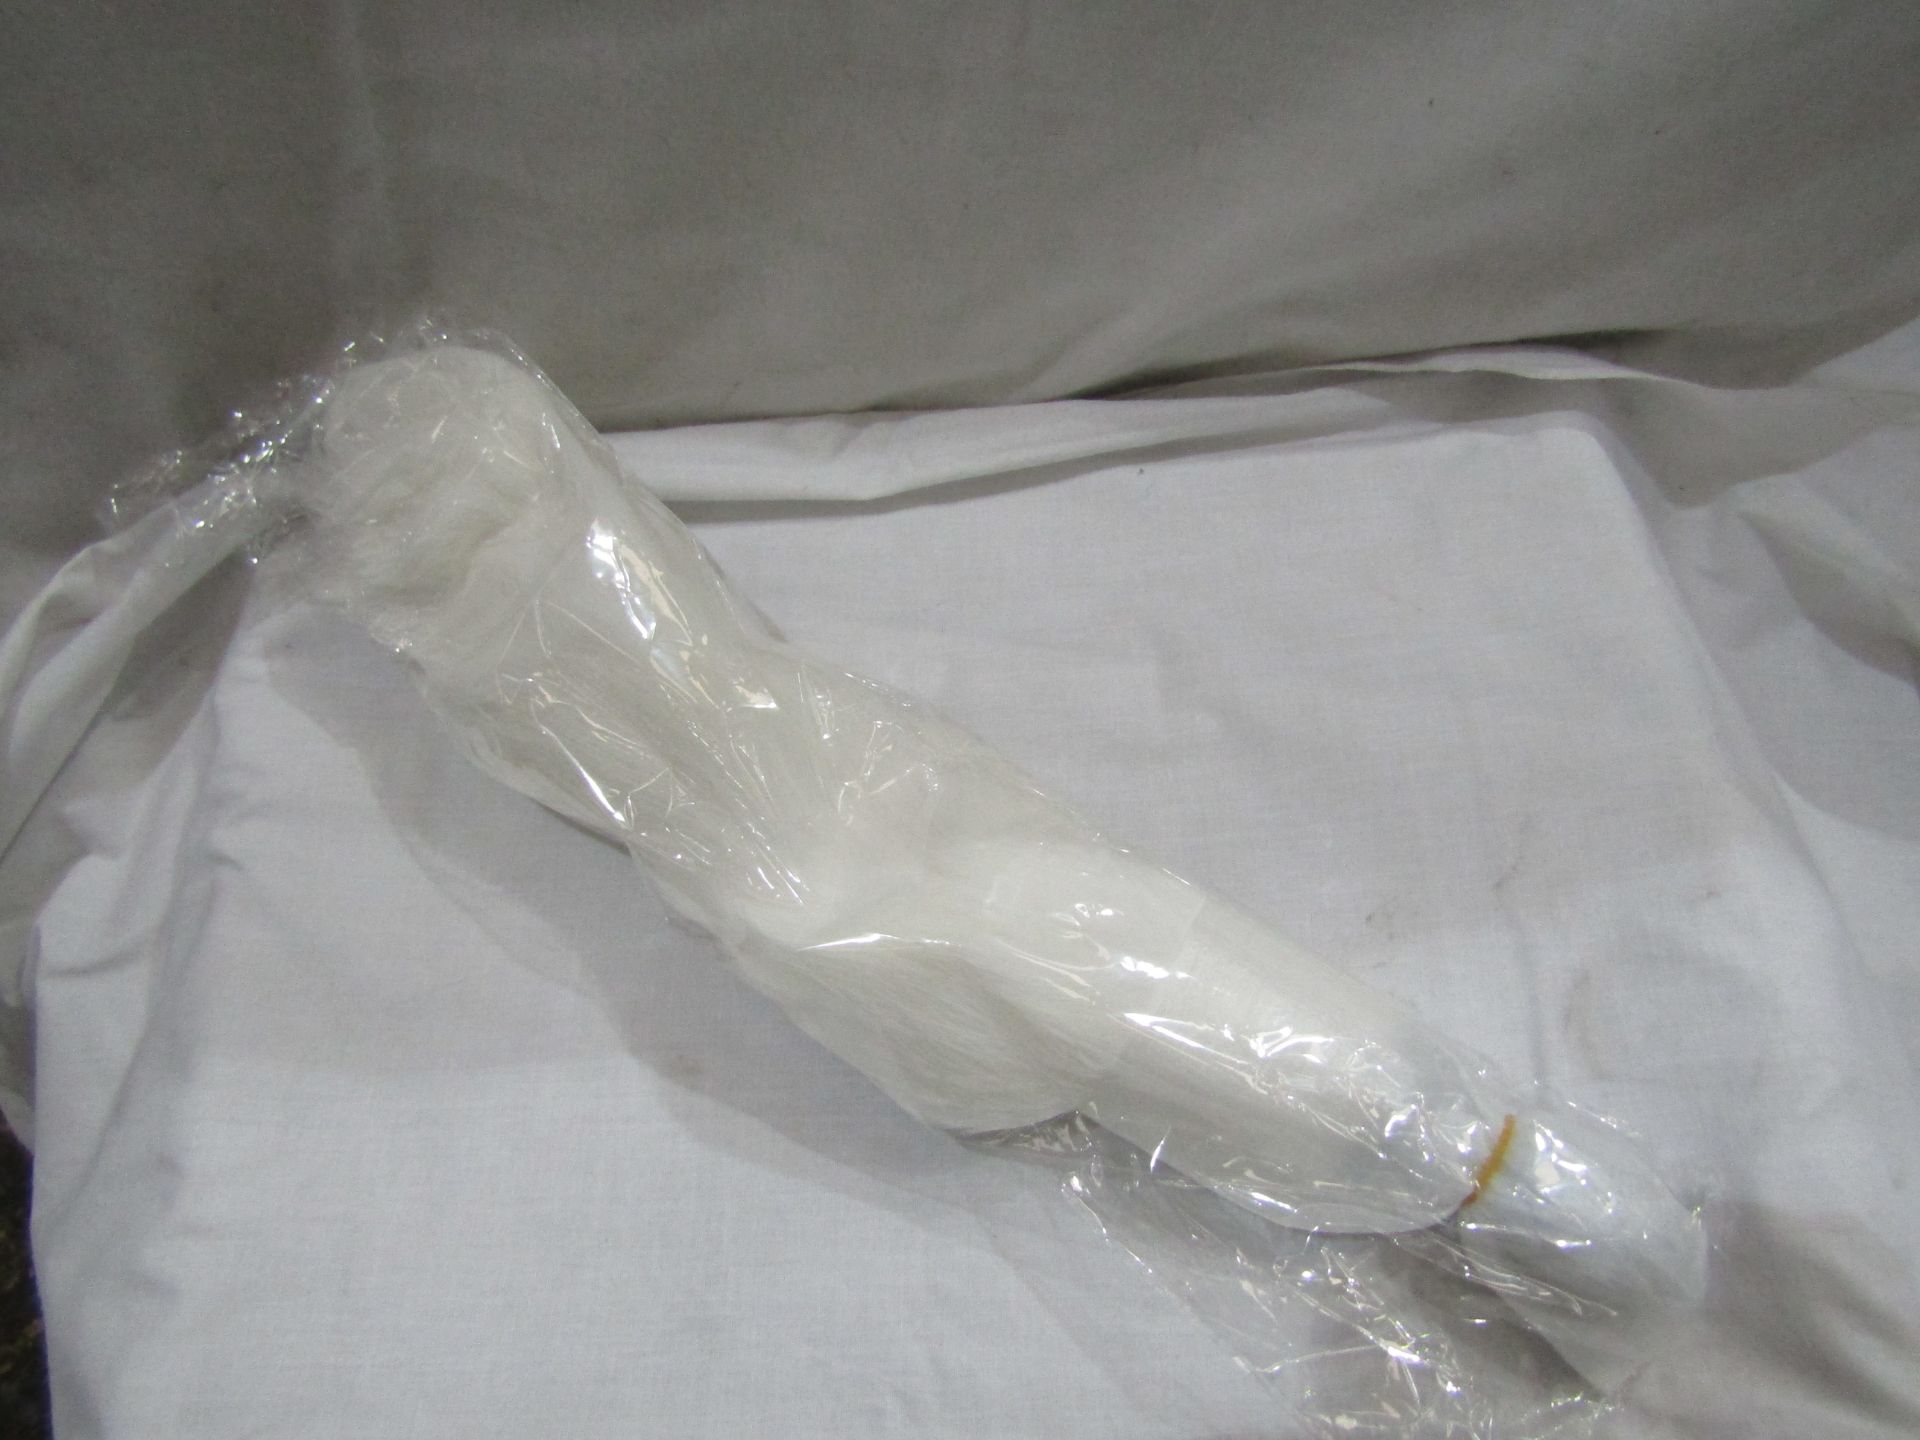 White Tail Butt Plug Toy - New.